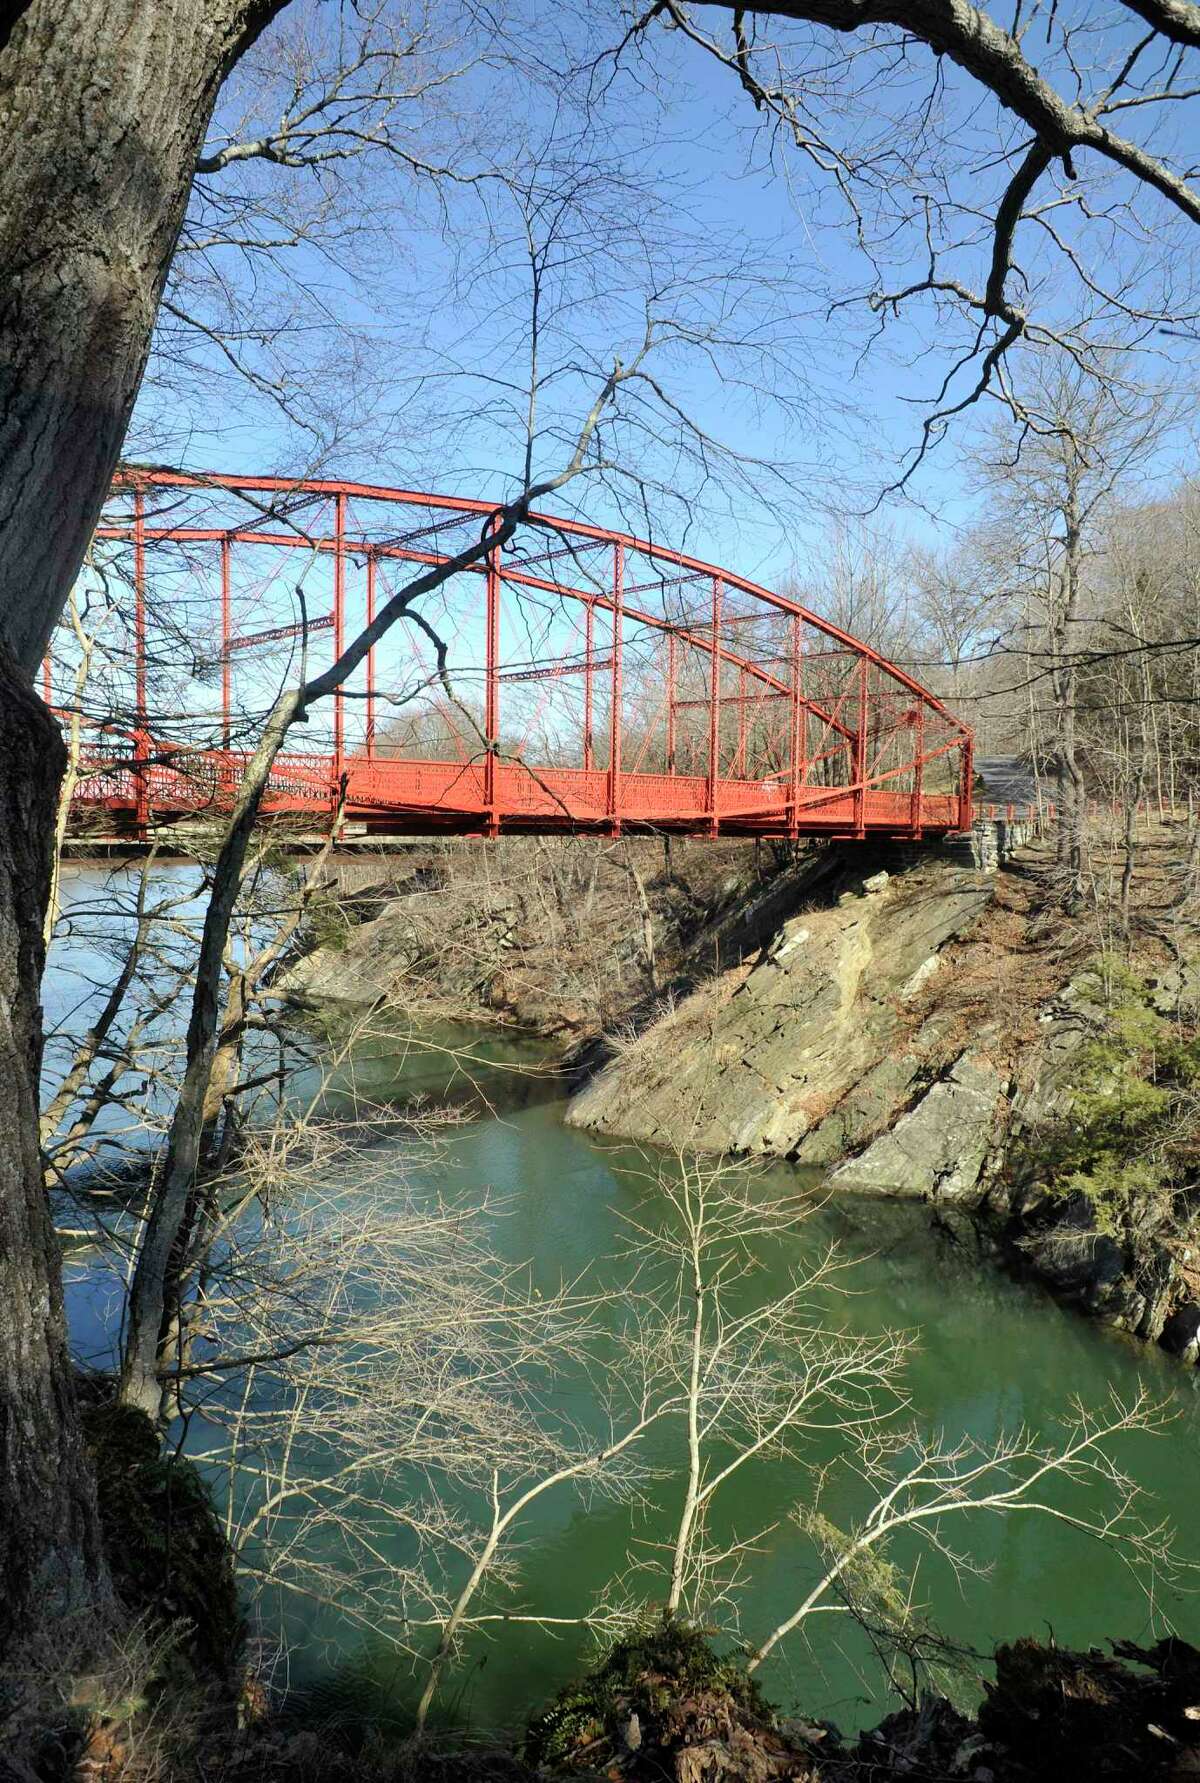 A view of Lovers Leap Bridge in New Milford